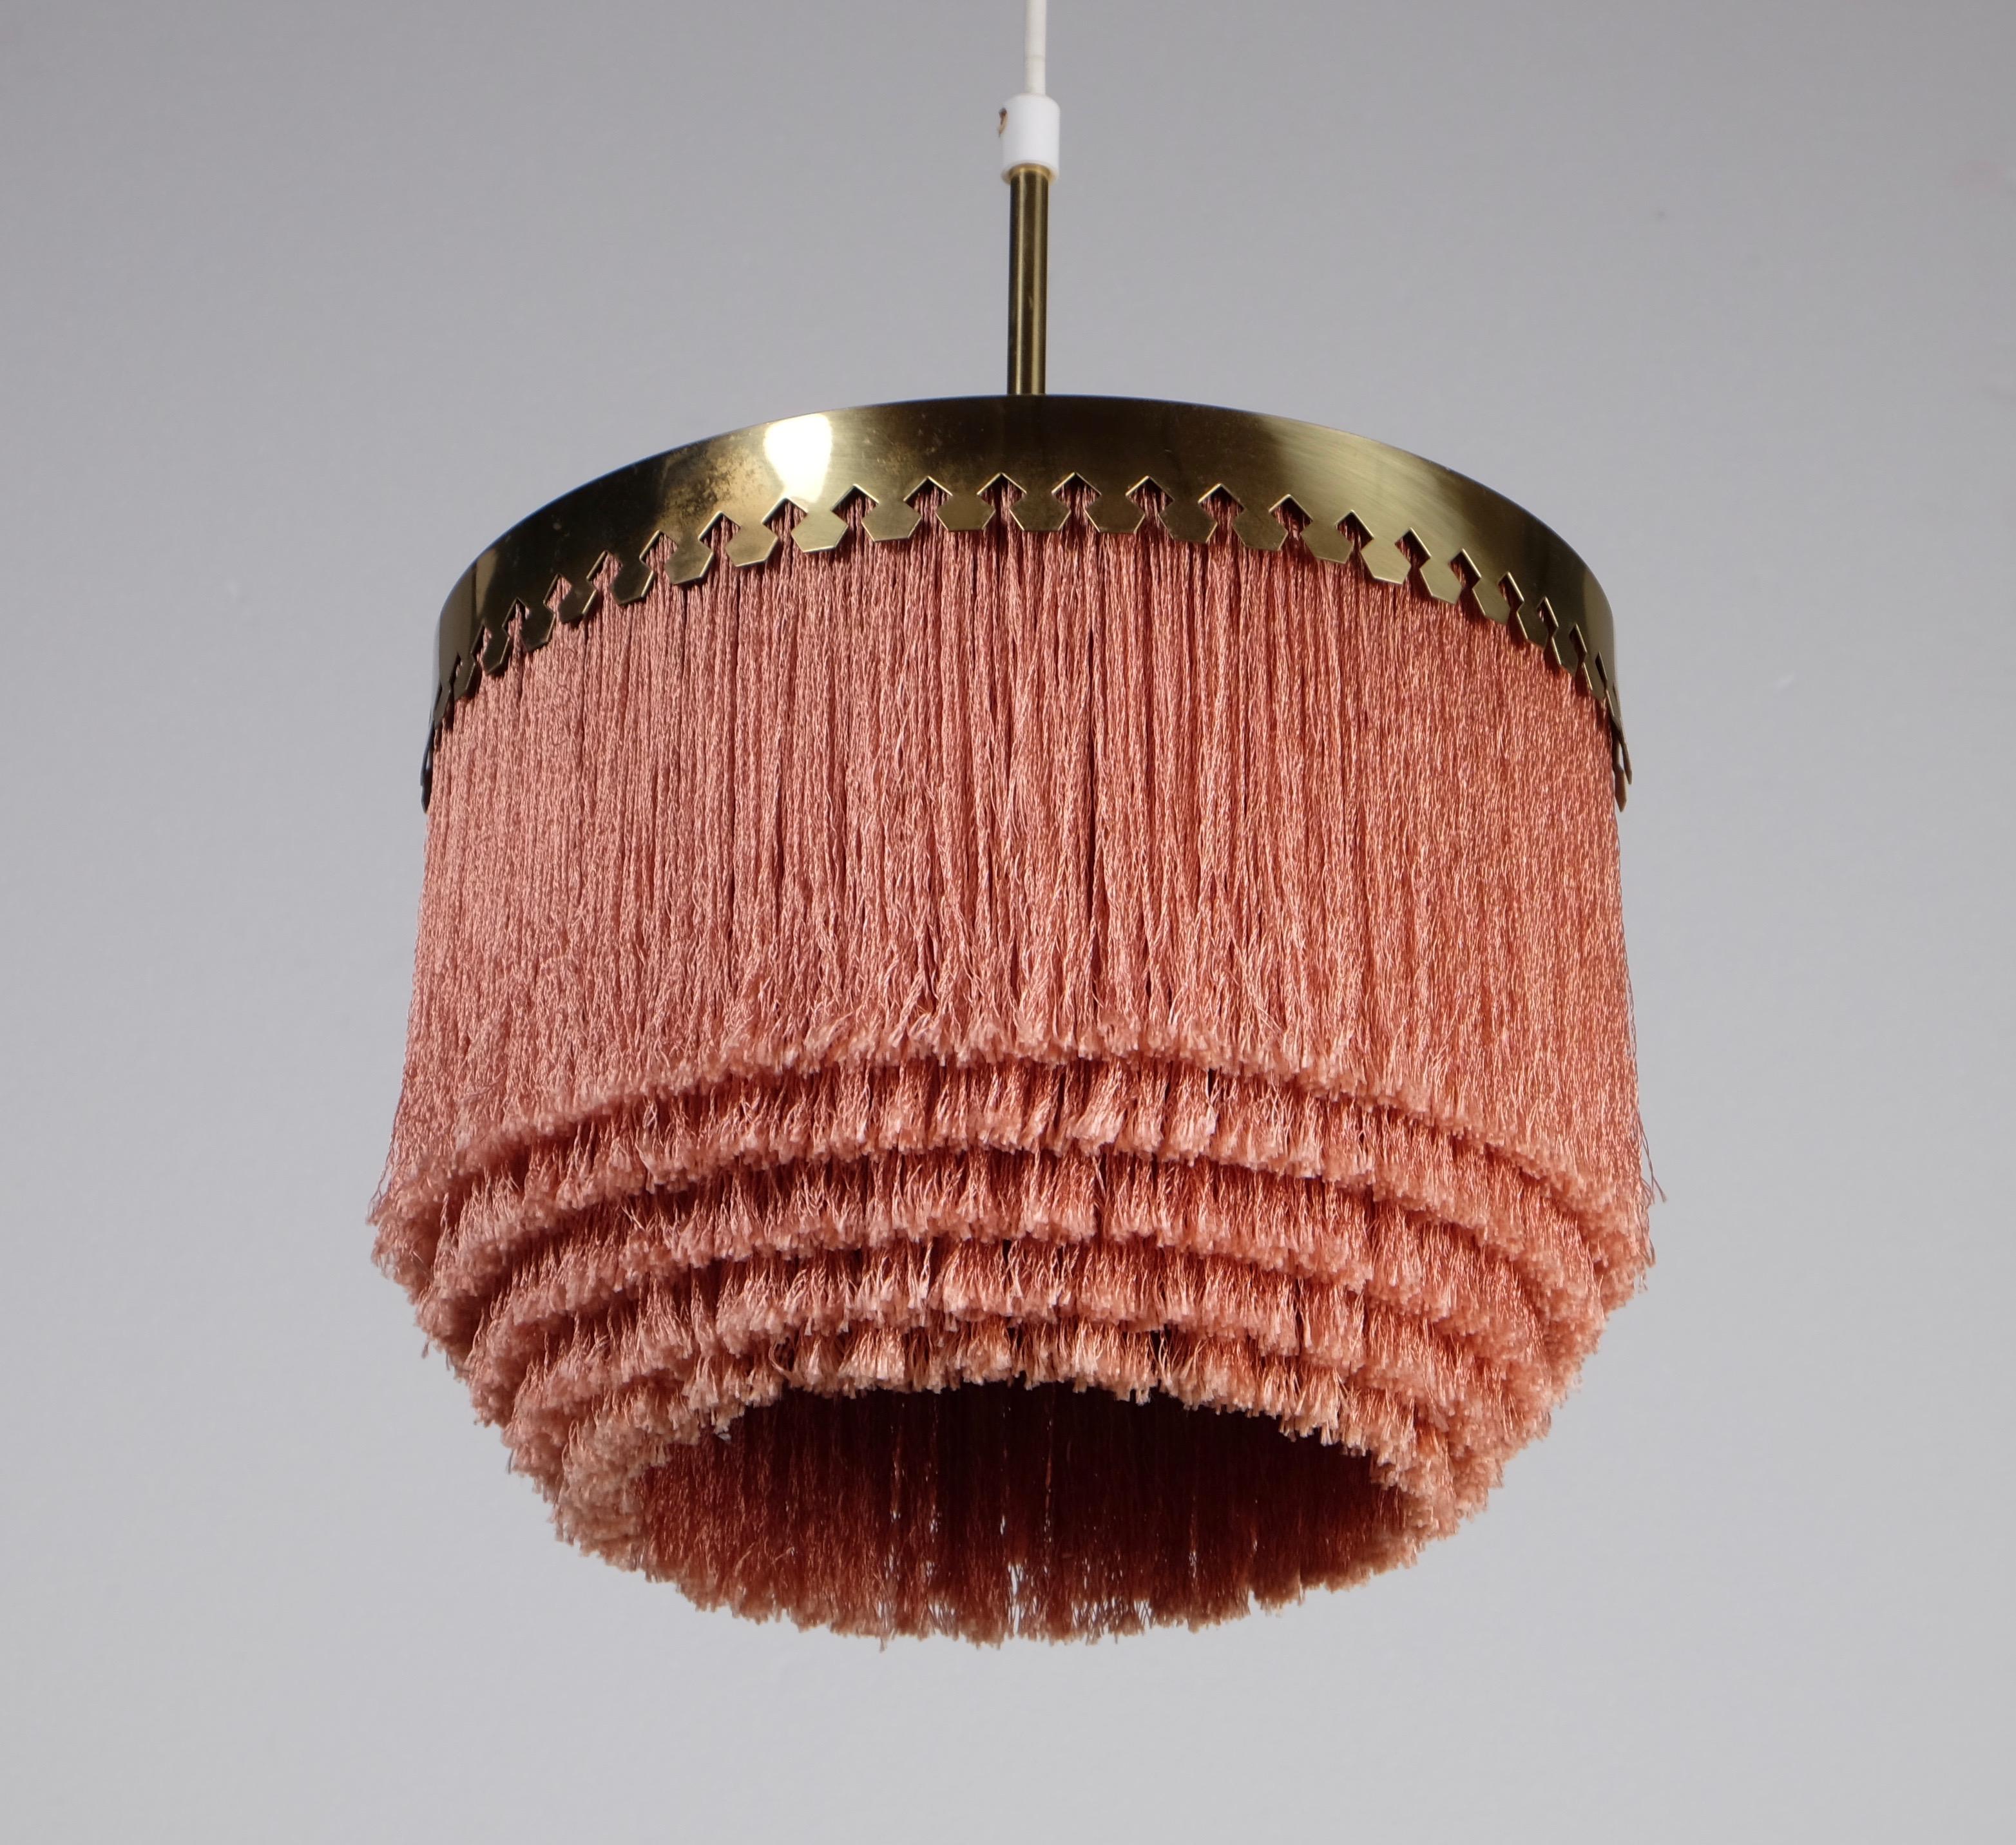 Brass and silk fringes. Produced by Hans-Agne Jakobsson, Markaryd, Sweden, 1960s.
Measures: Diameter 28 cm. Height is adjustable.